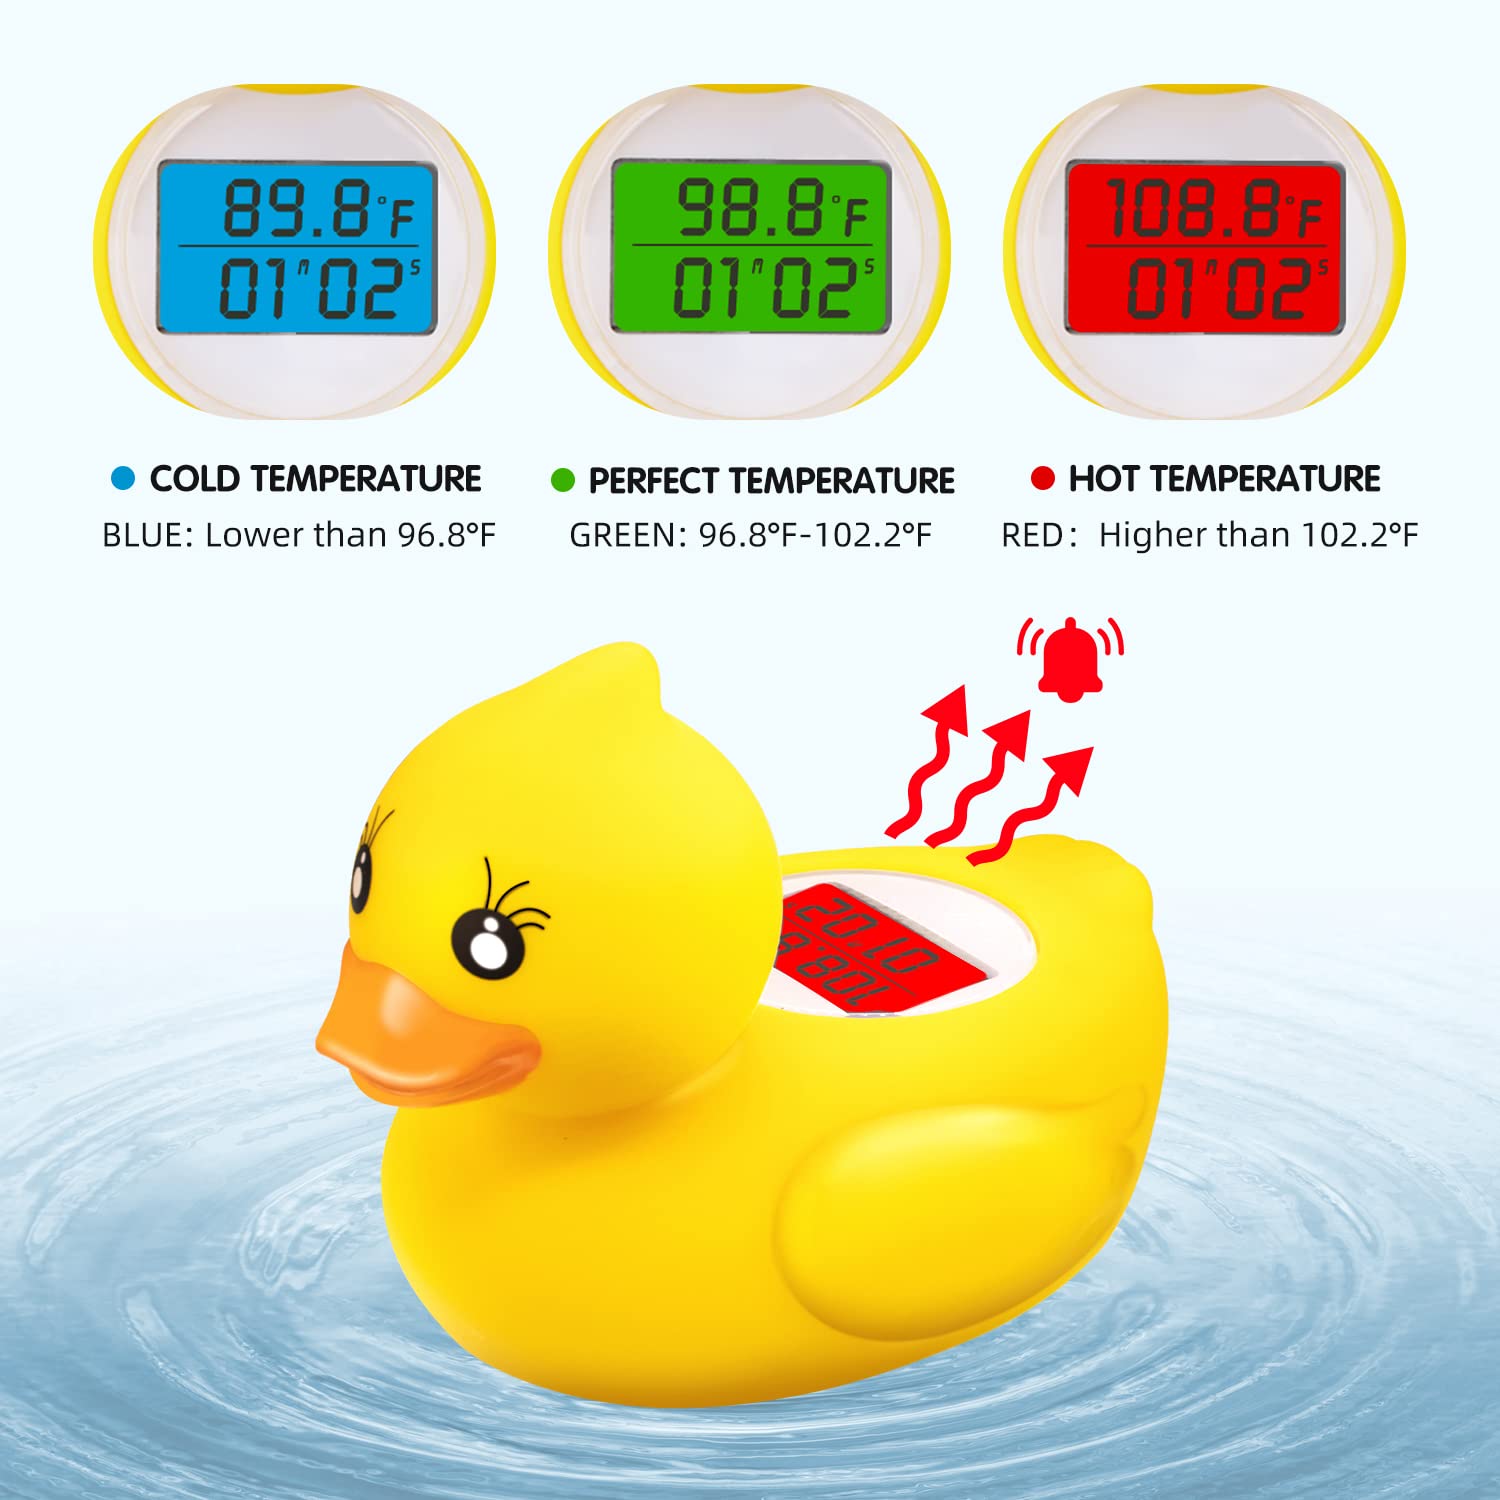 Baby Bath Tub Water Thermometer - (Upgraded Version) Digital Water Temperature Thermometer & Room Thermometer, Duck Floating Toy for Infant Toddler Bathtub Pool with Temperature Warning